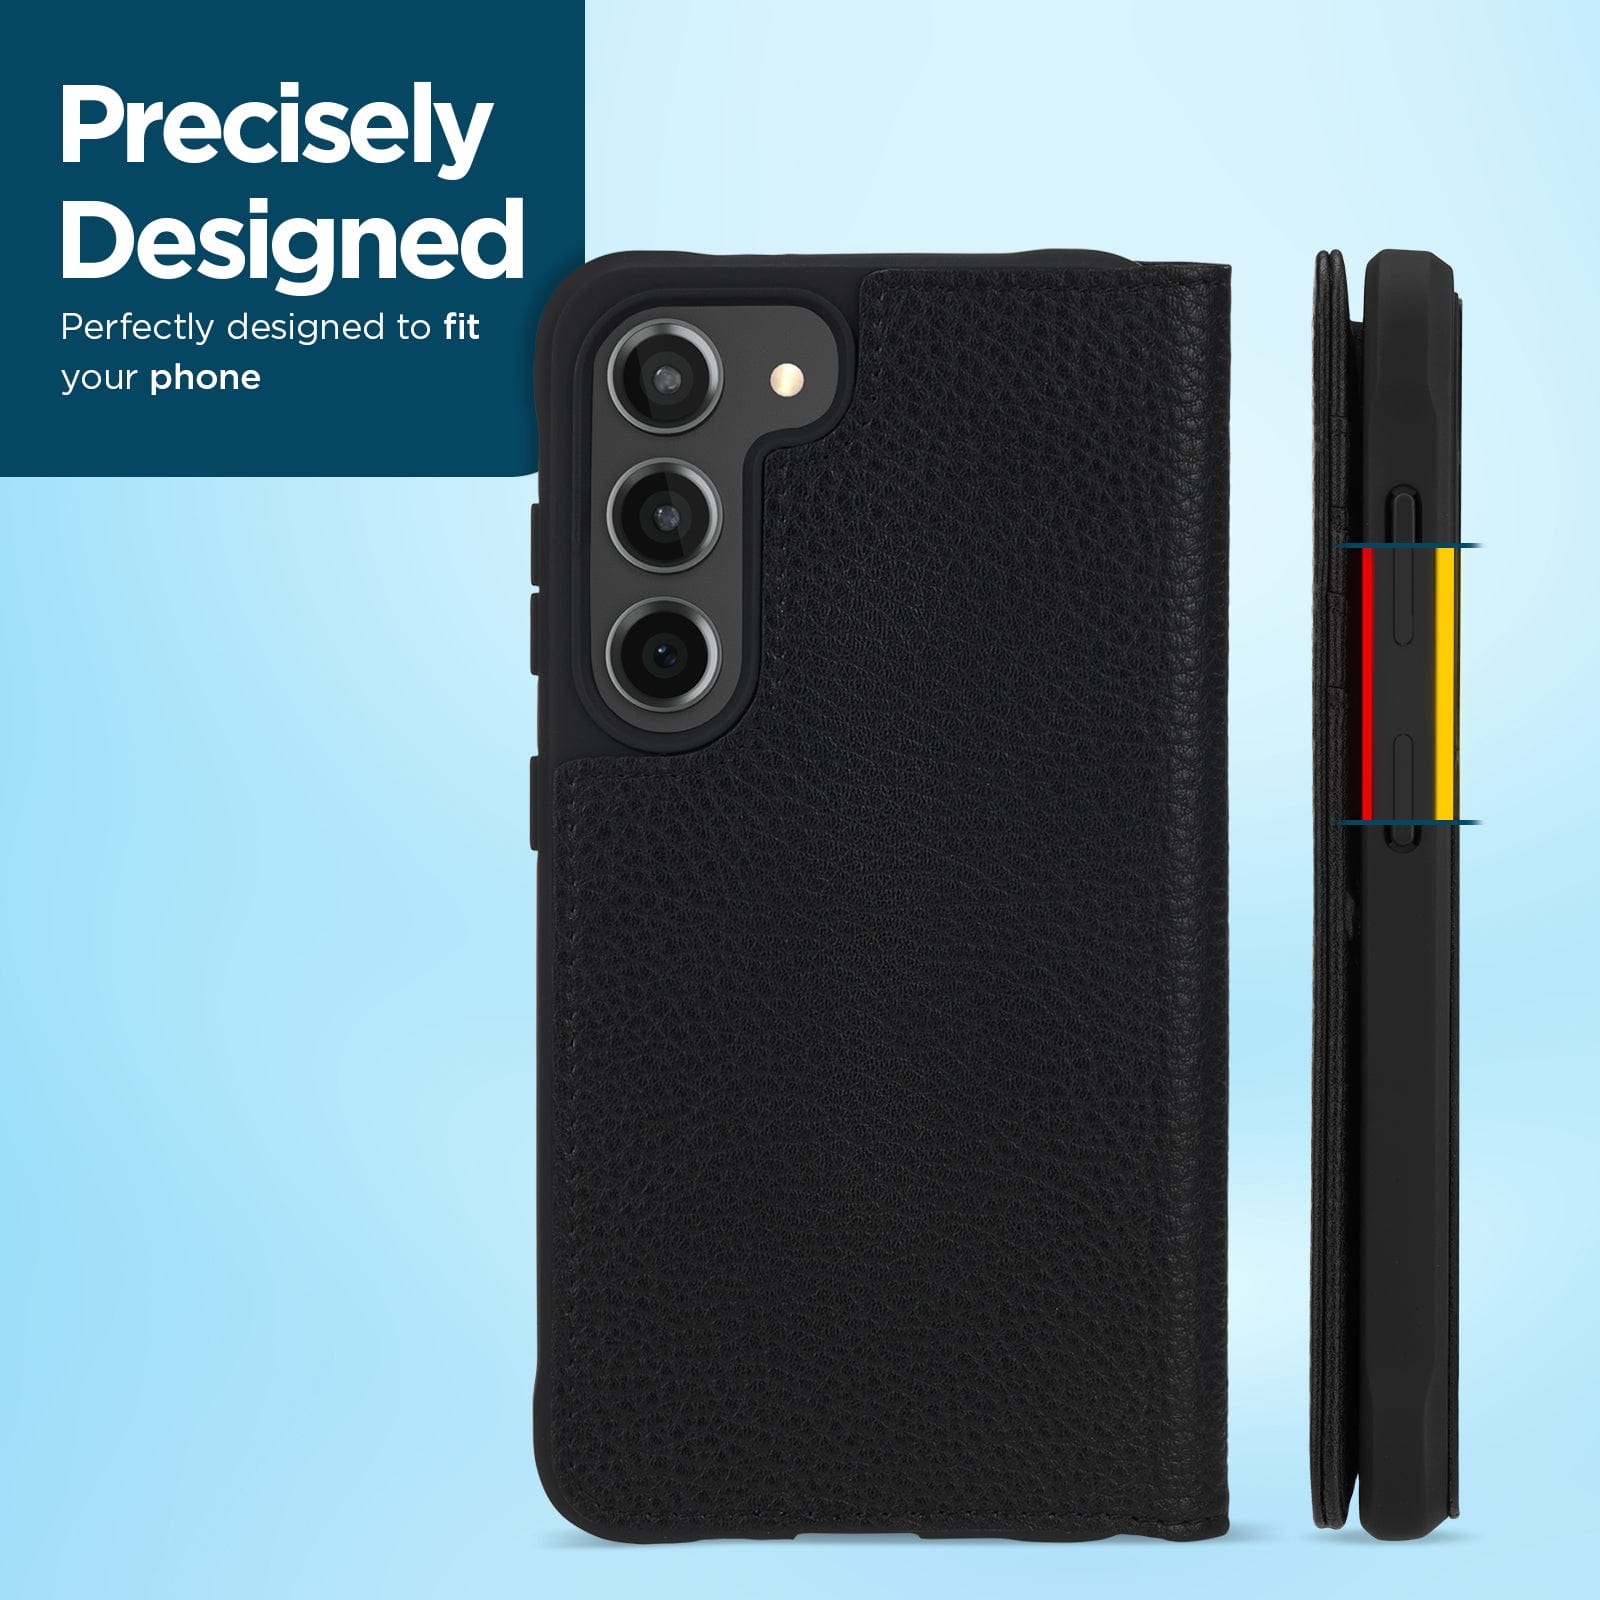 PRECISELY DESIGNED. PERFECTLY DESIGNED TO FIT YOUR PHONE. 